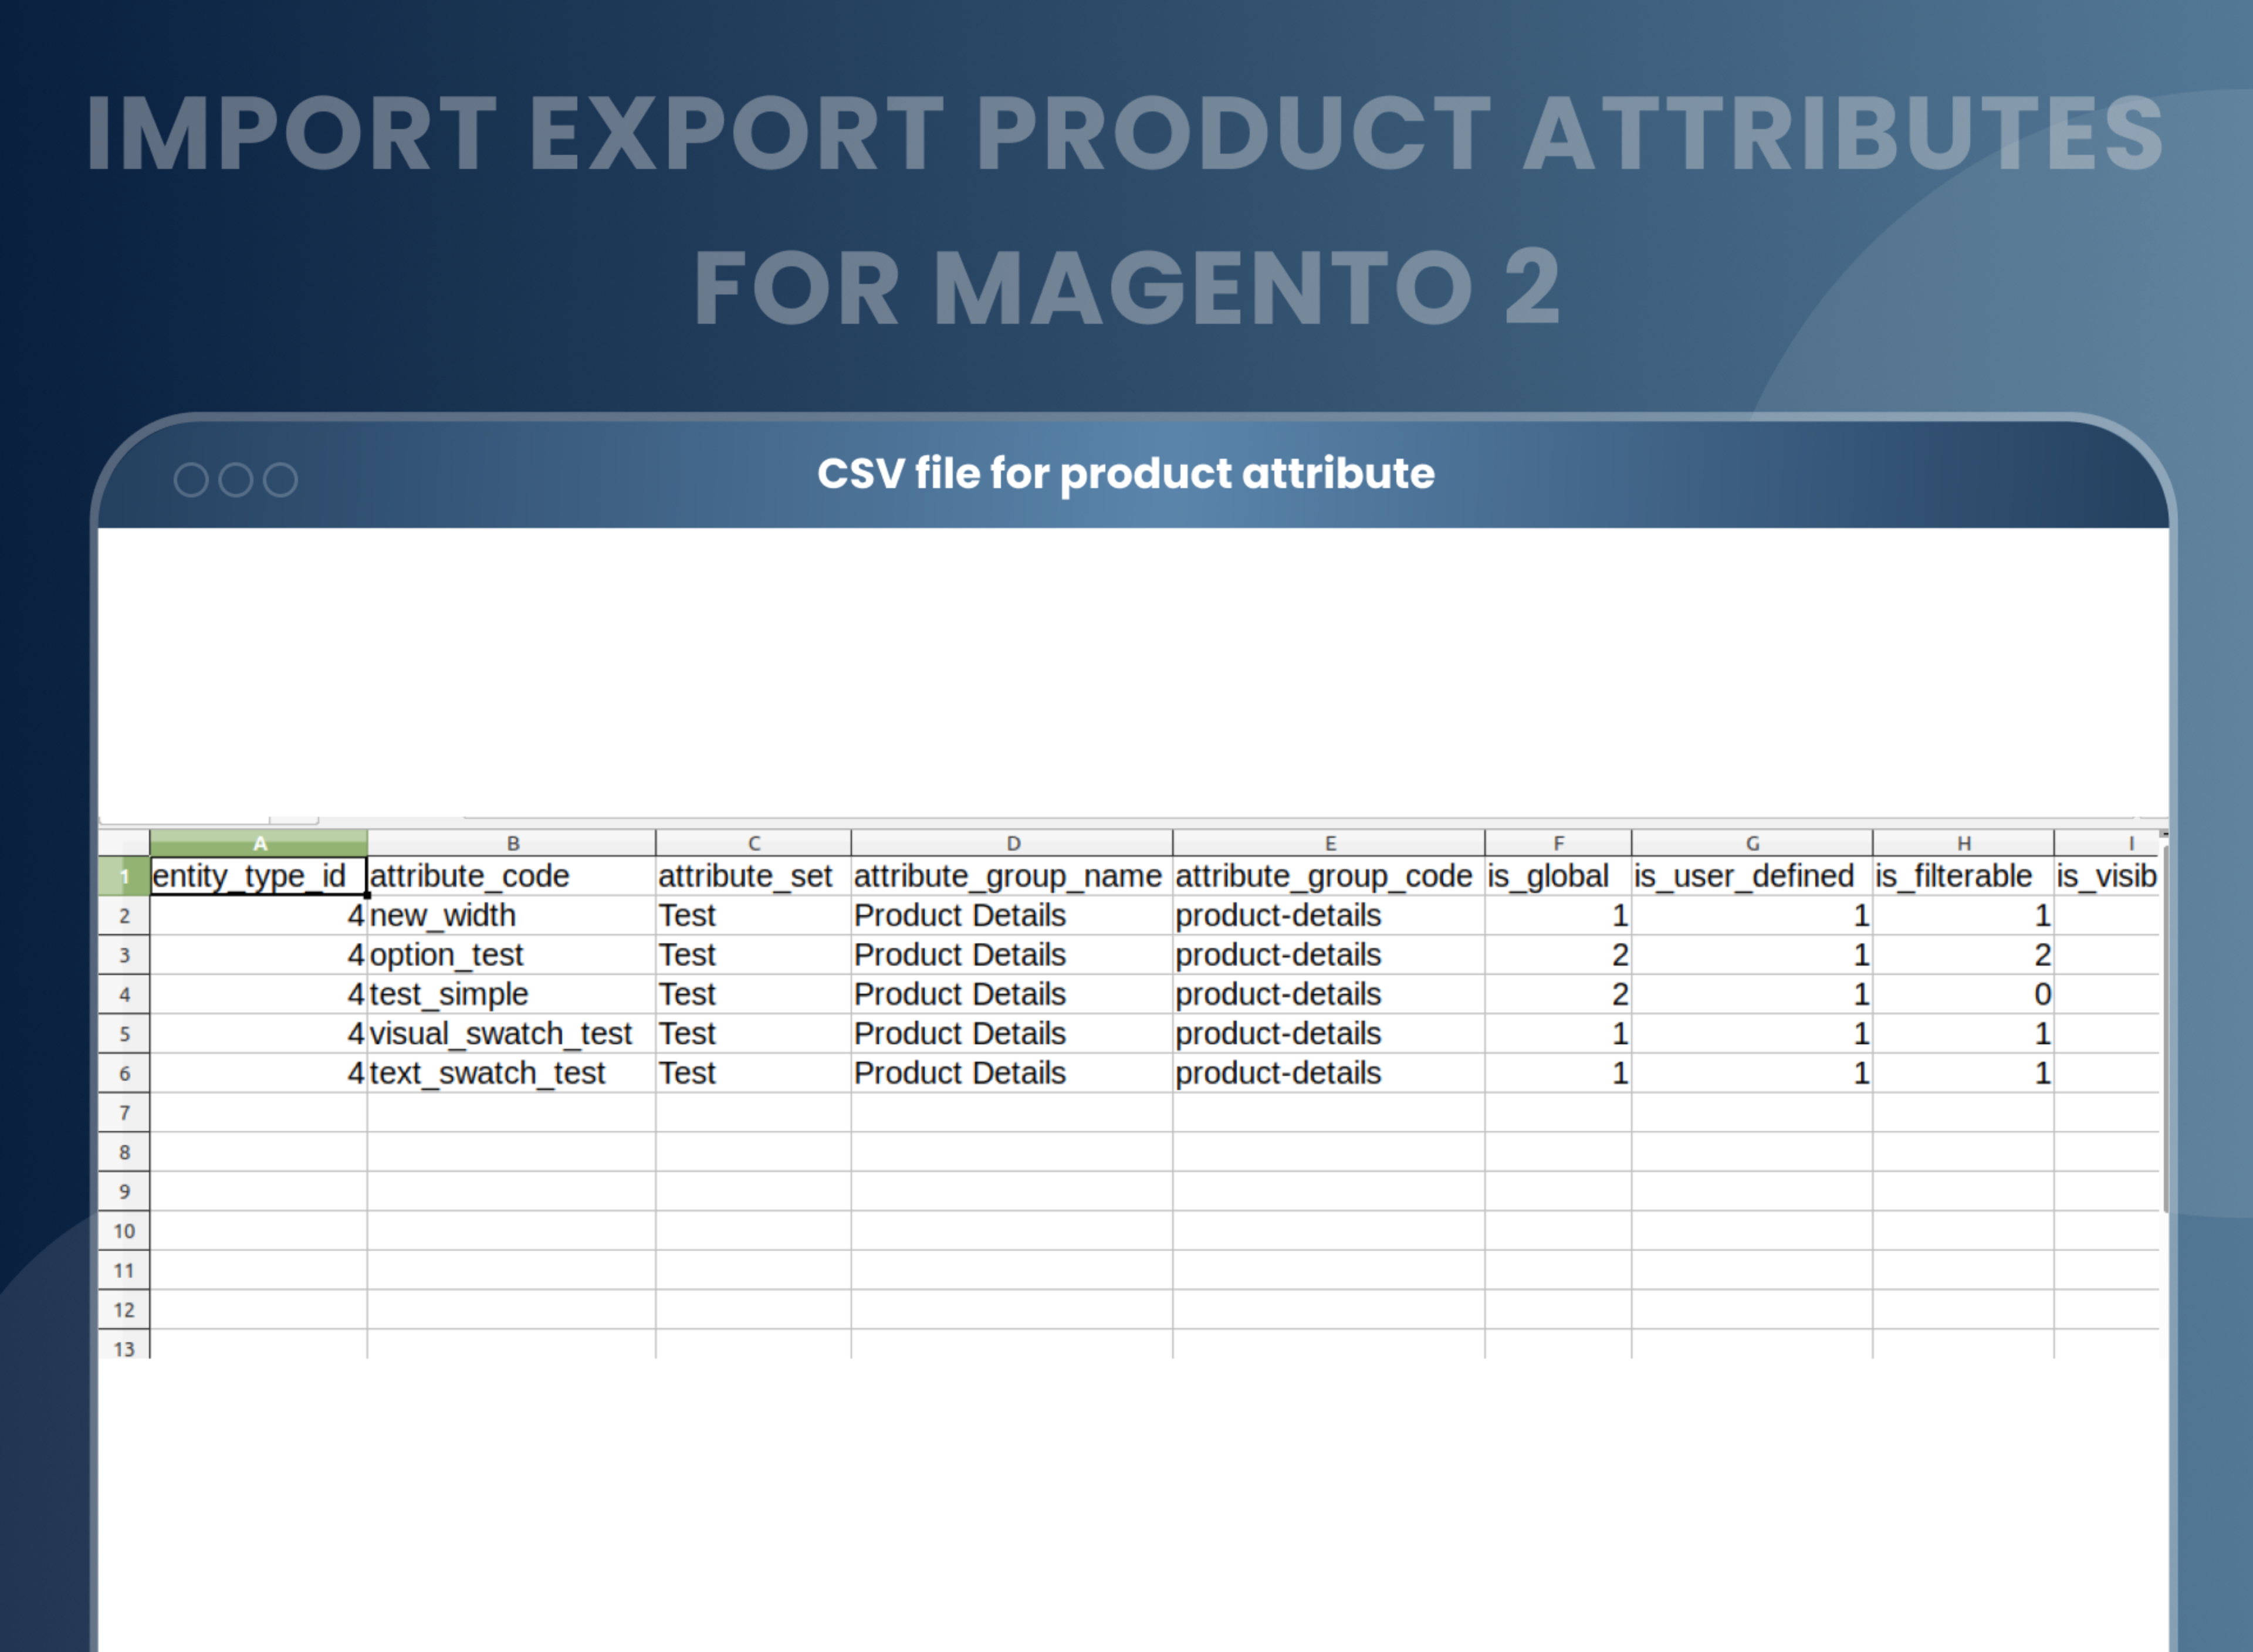  CSV file for product attribute